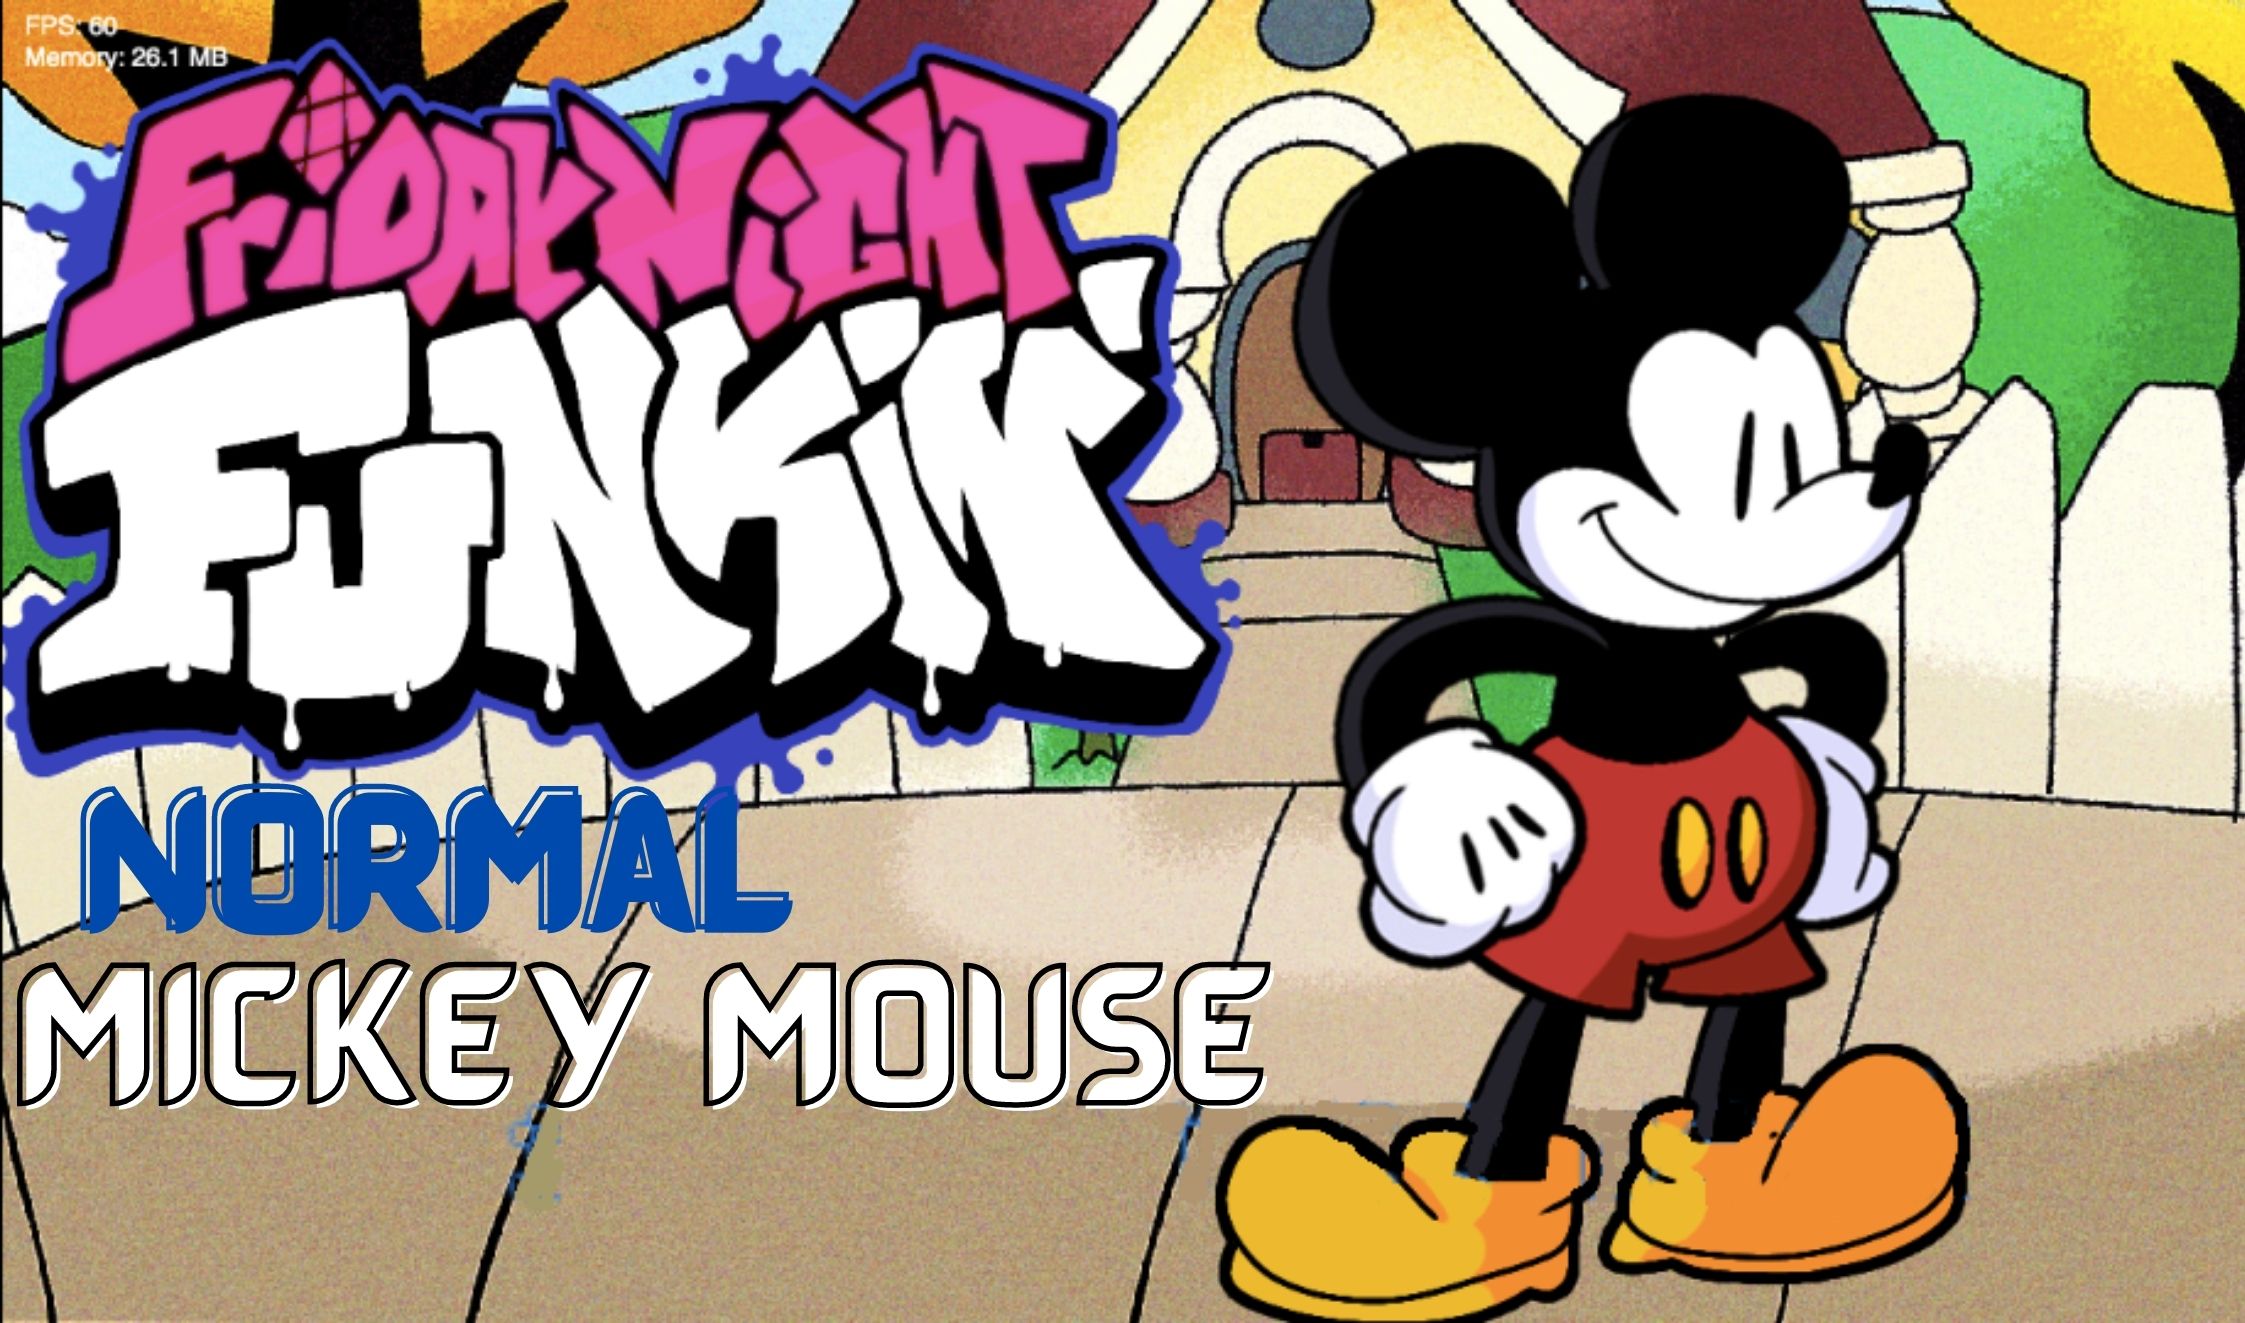 Mickey mouse fnf - songasl